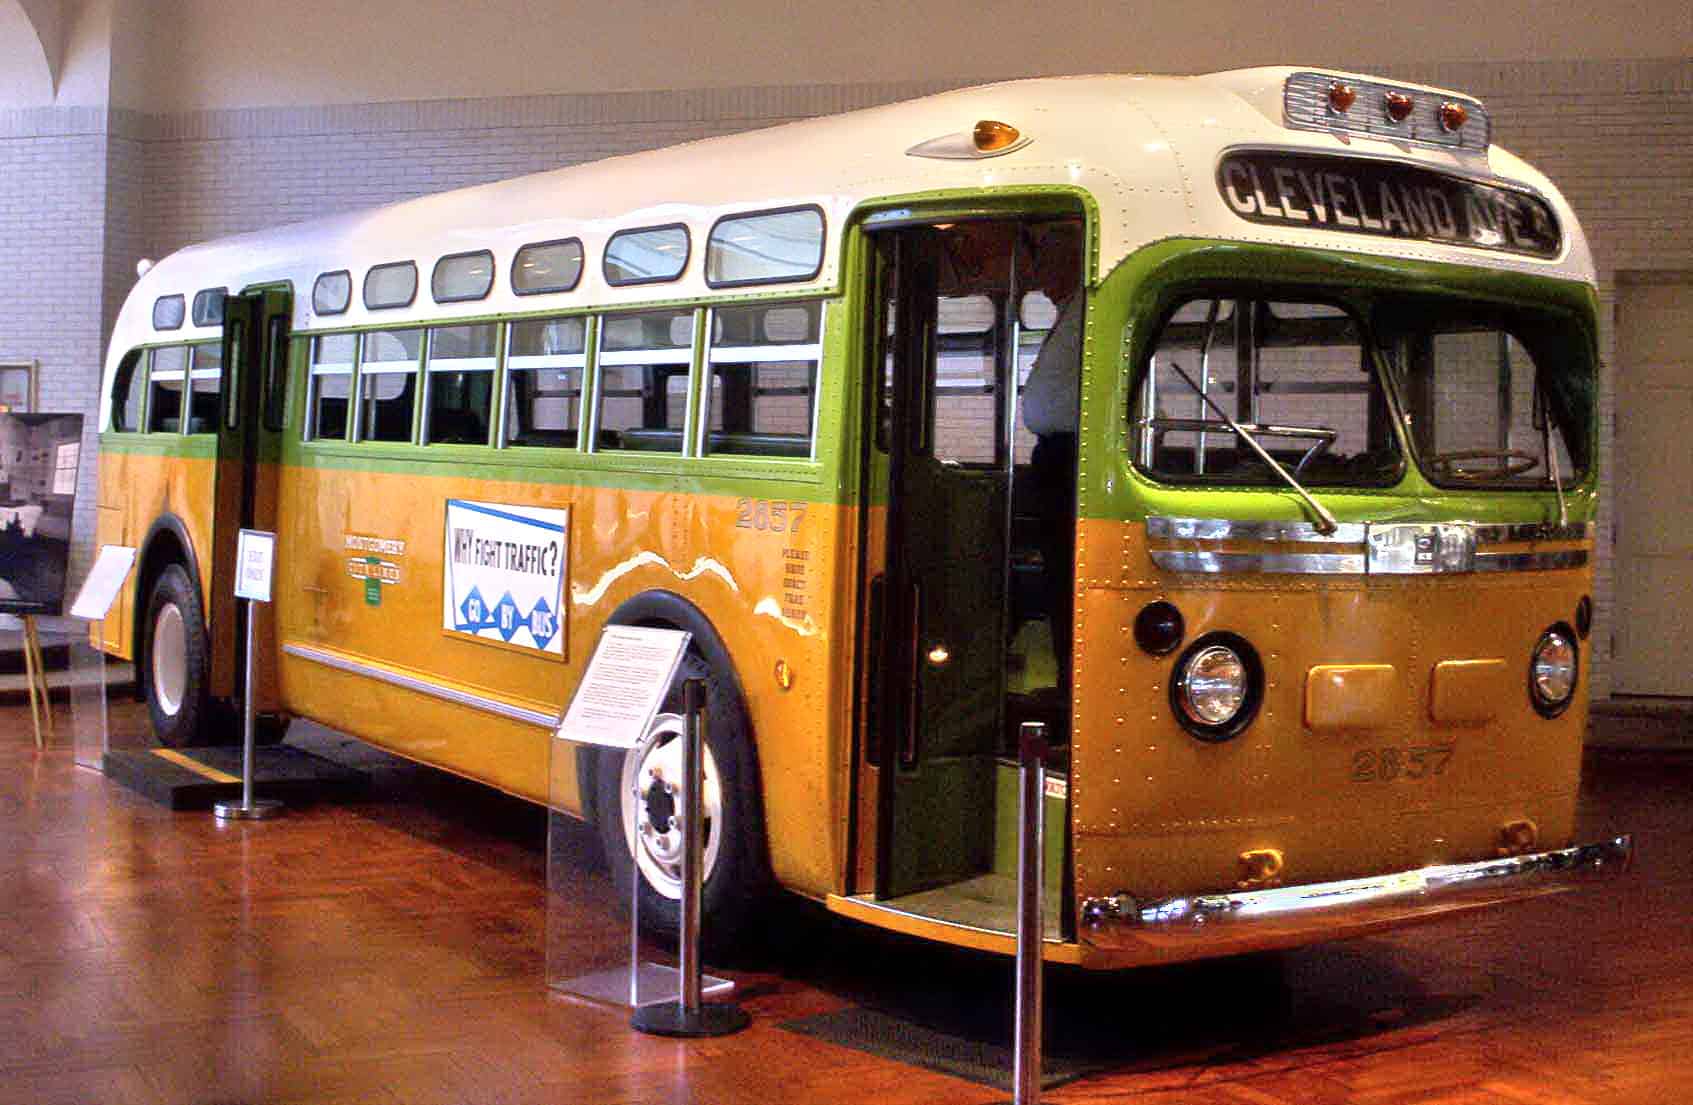 A Montgomery bus sits in a museum. Photo courtesy of Wikimedia Commons.